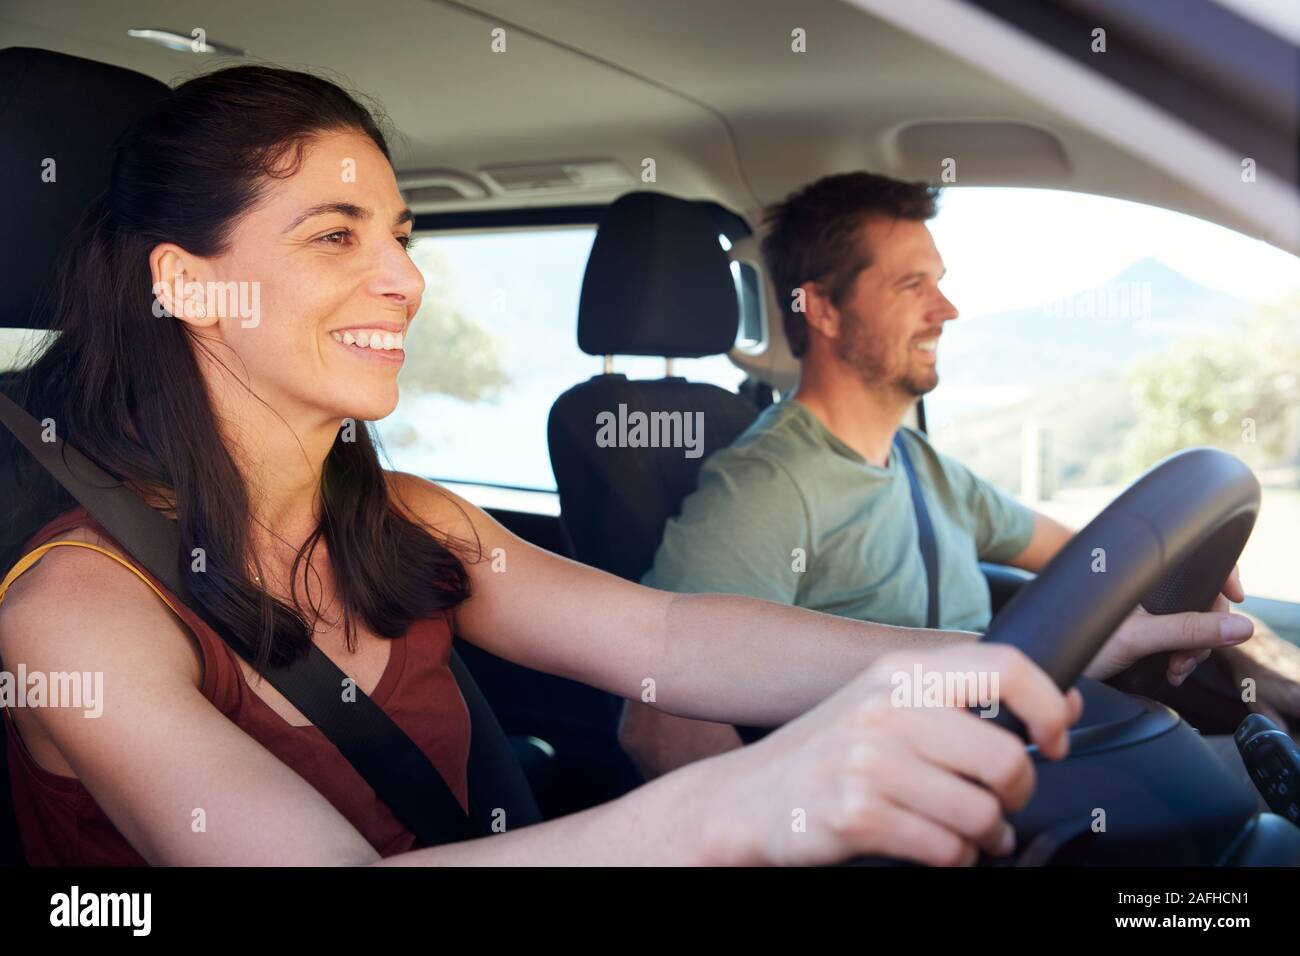 Mid adult white woman driving car, husband beside her in front passenger seat, close up, side view Stock Photo